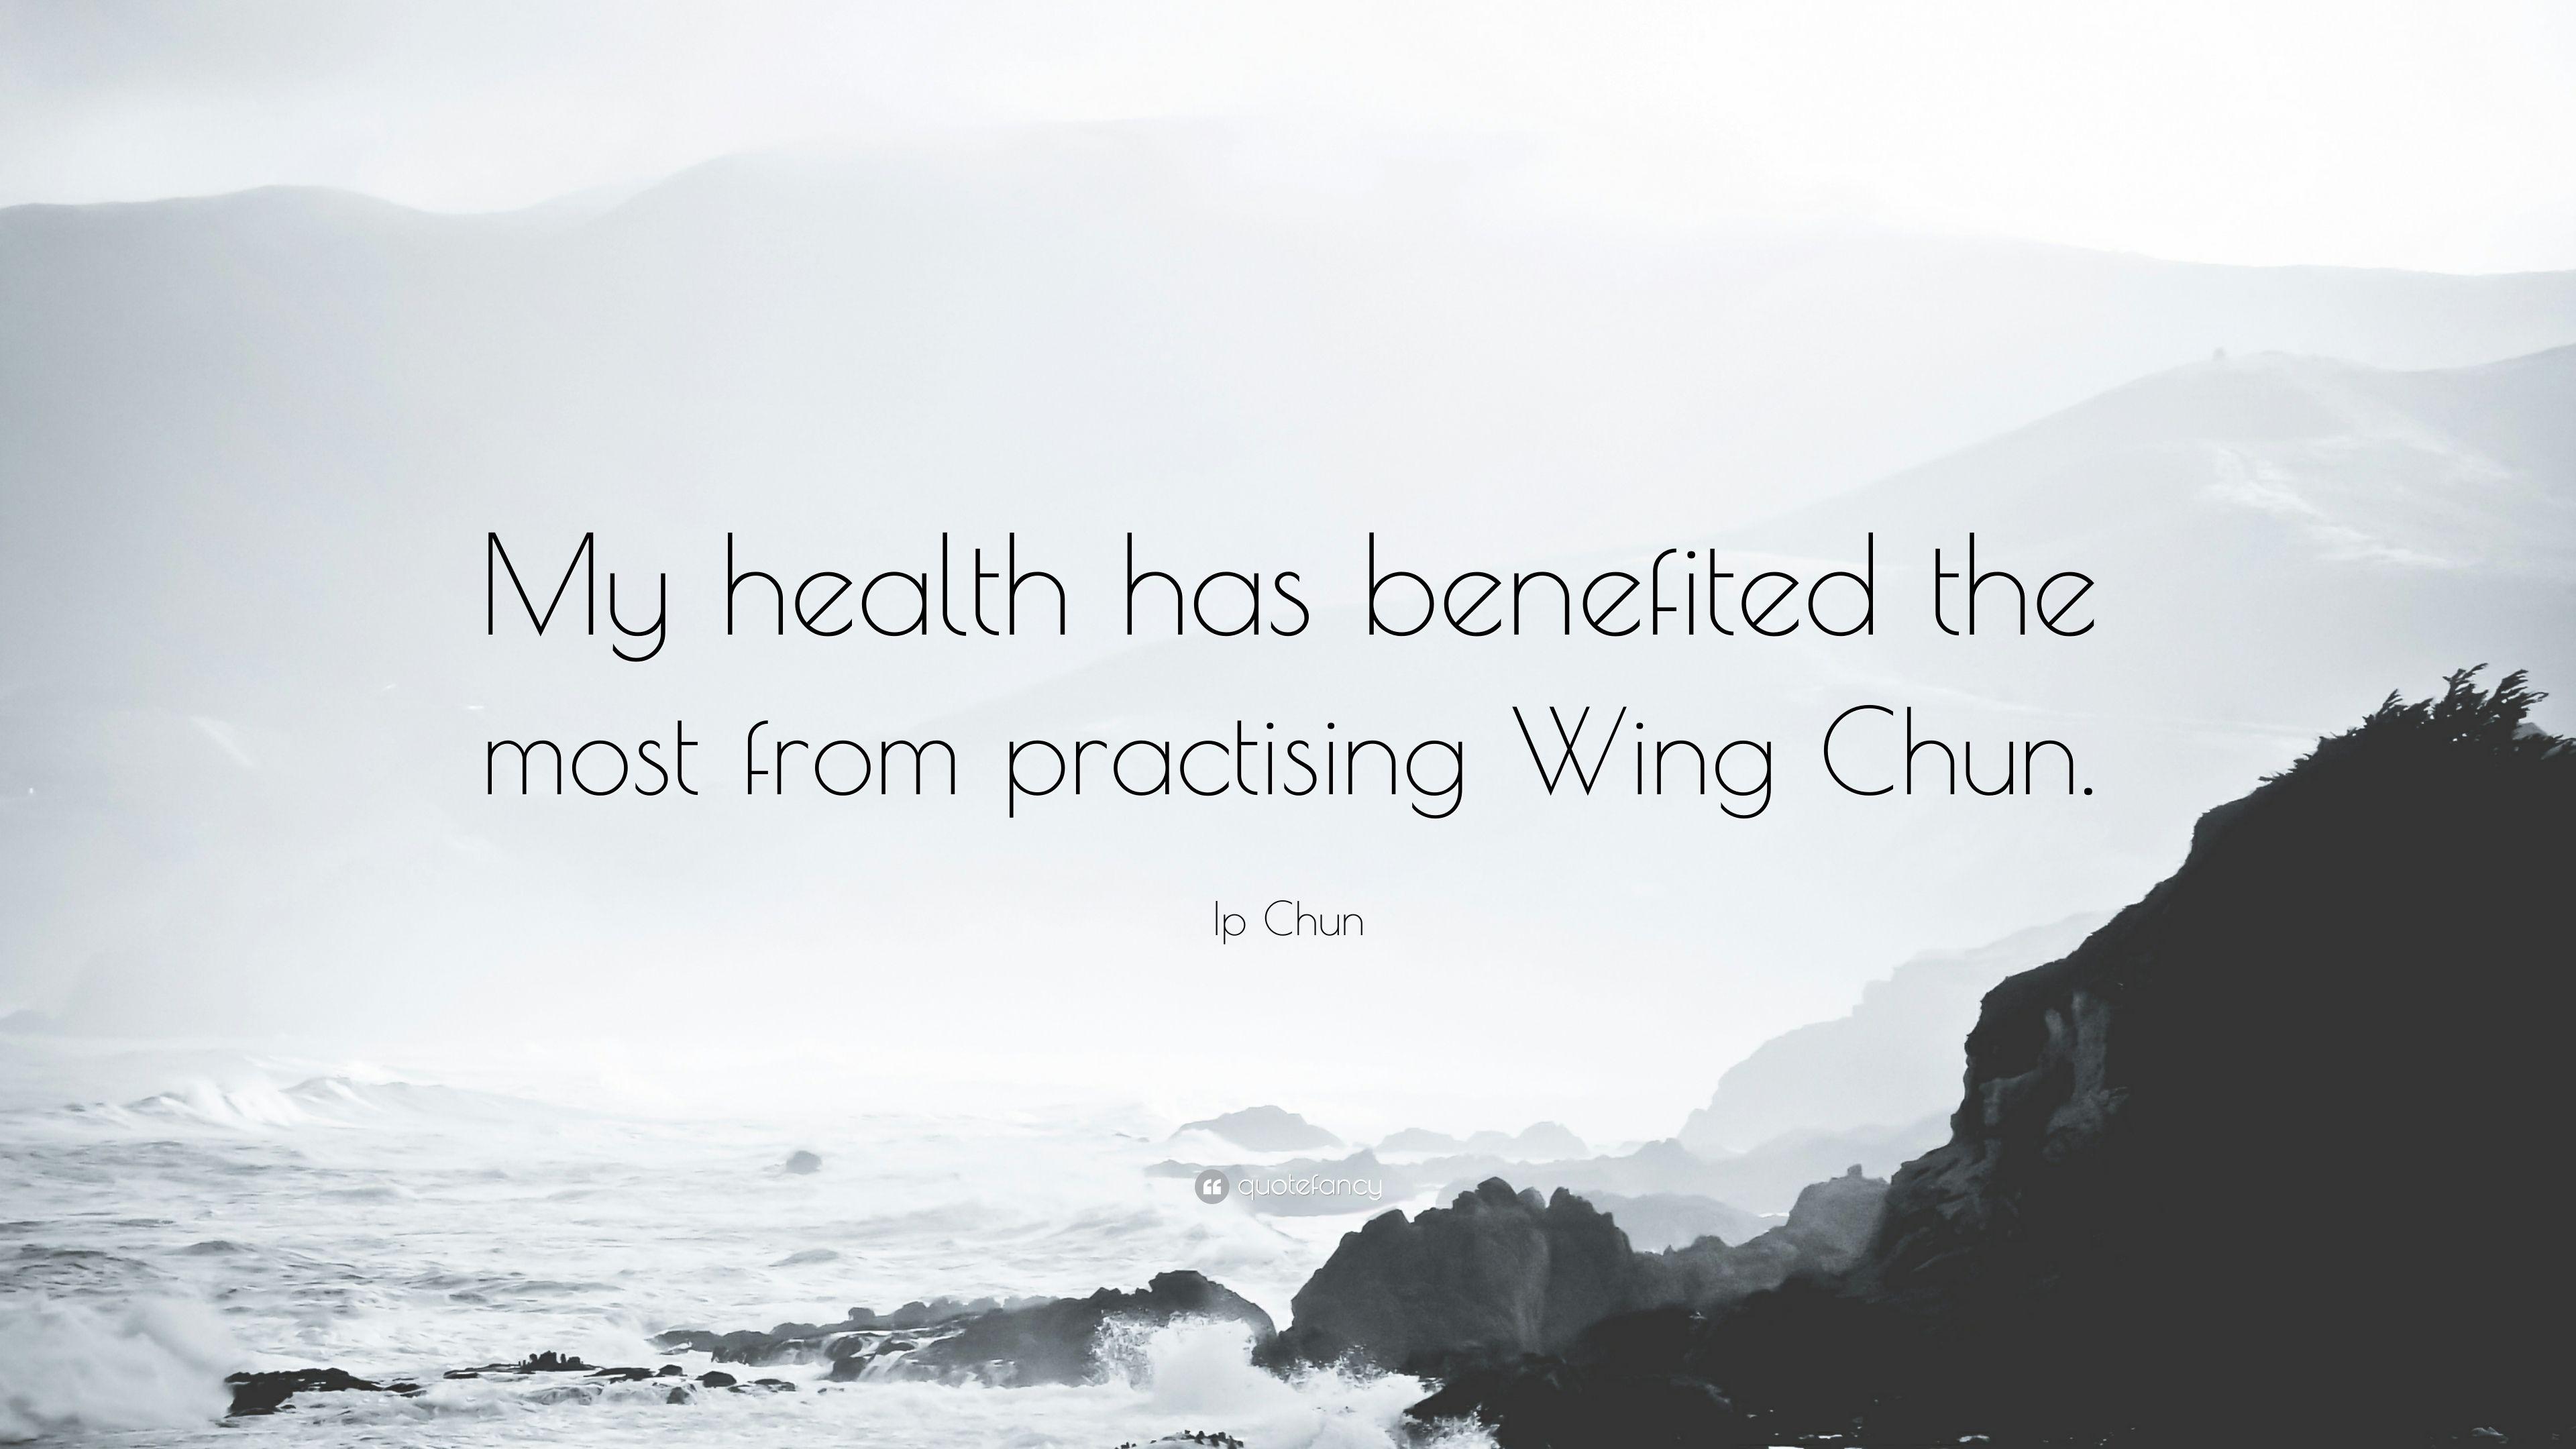 Ip Chun Quote: “My health has benefited the most from practising